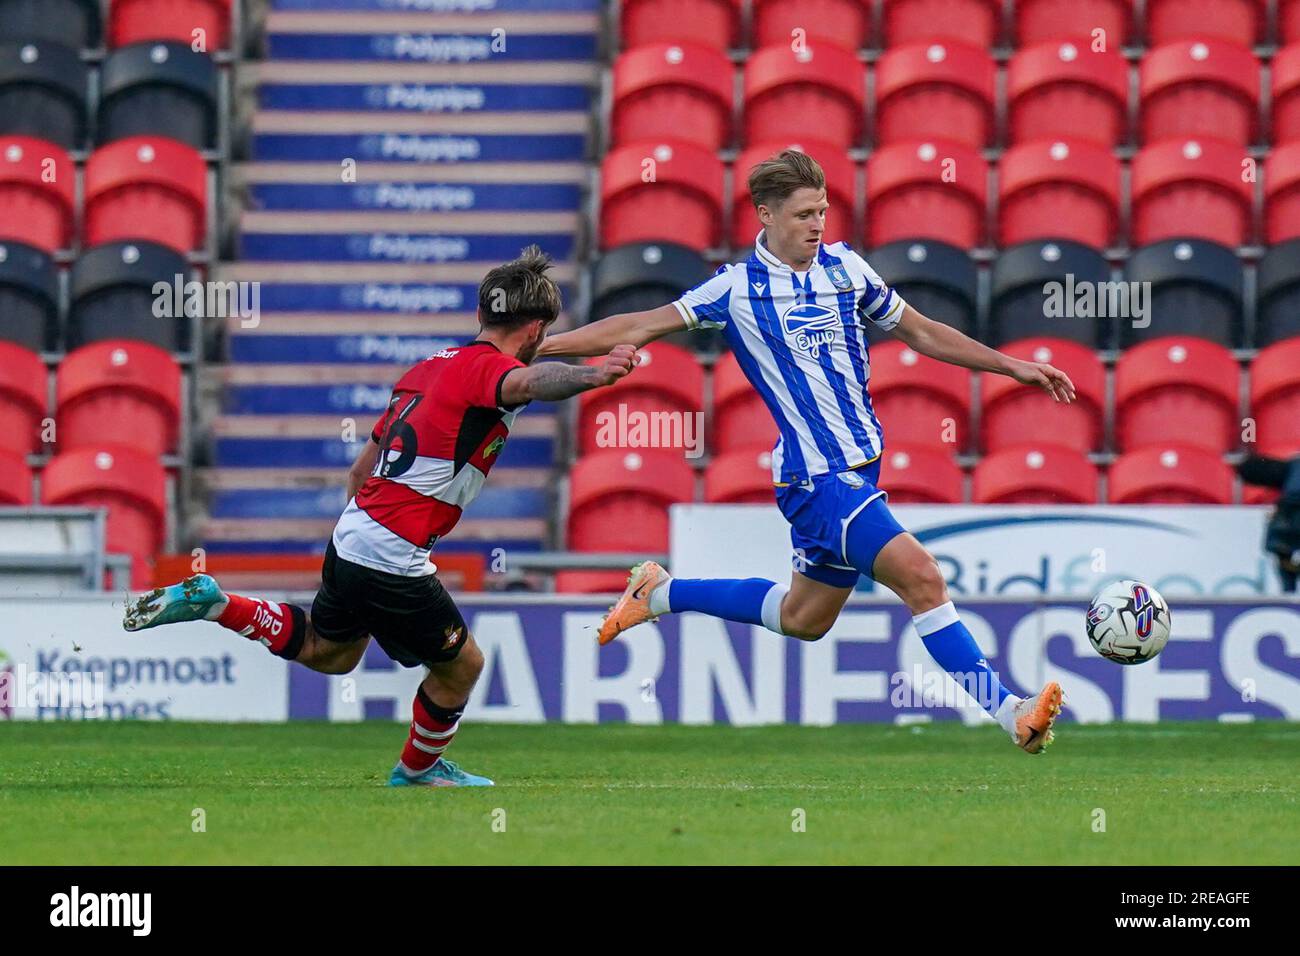 Doncaster, UK. 25th July, 2023. Sheffield Wednesday George Byers and Doncaster Rovers Tom Nixon during the Doncaster Rovers FC vs Sheffield Wednesday FC Pre-Season match at Eco-Power Stadium, Doncaster, United Kingdom on 25 July 2023 Credit: Every Second Media/Alamy Live News Stock Photo